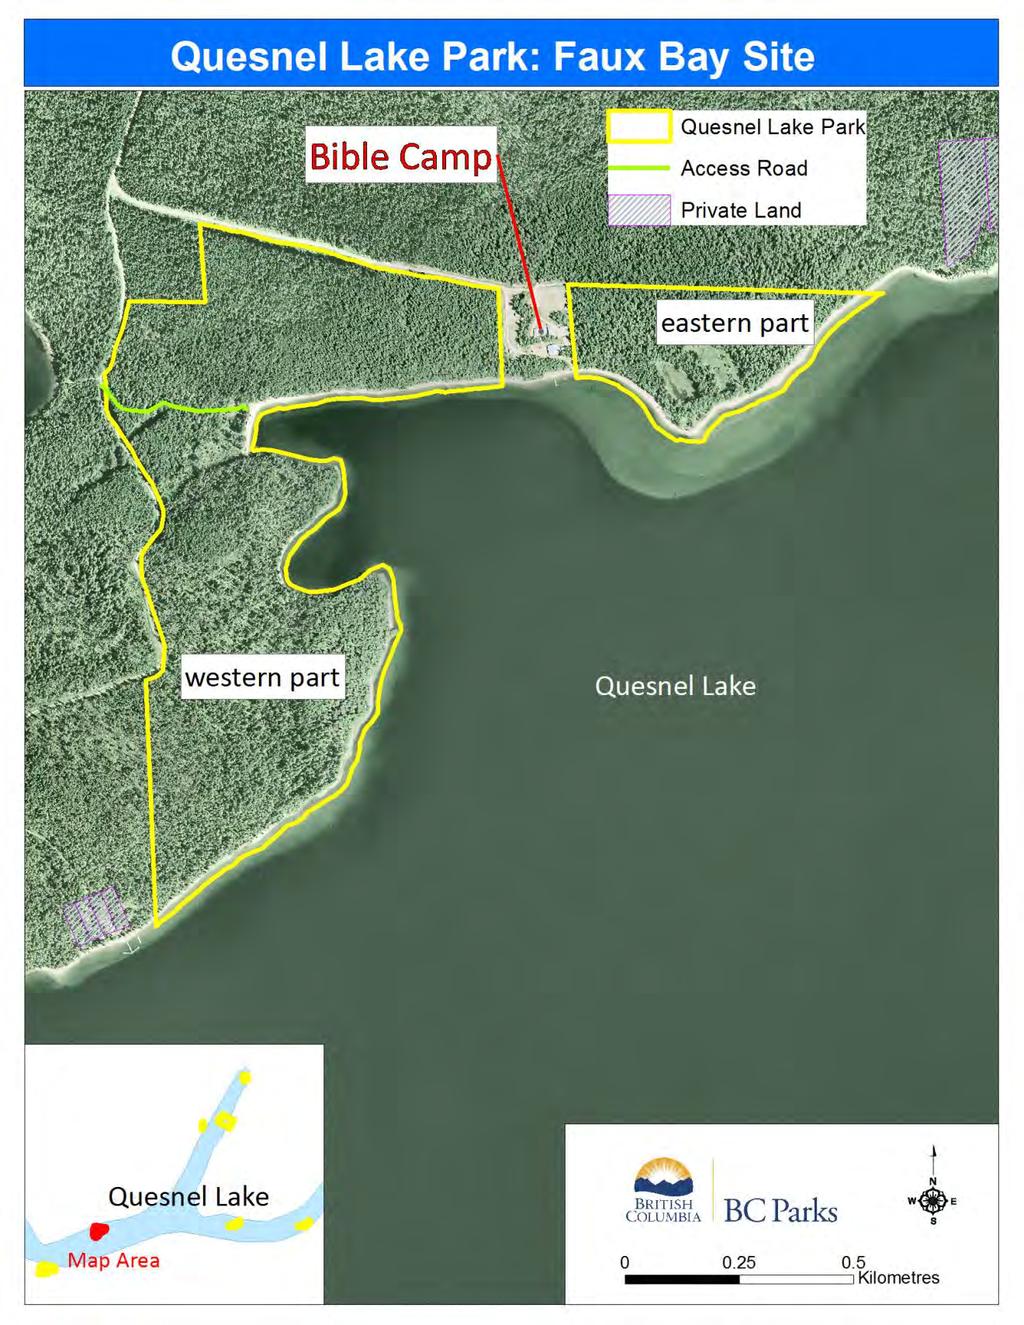 Figure 5: Map of the Faux Bay Site